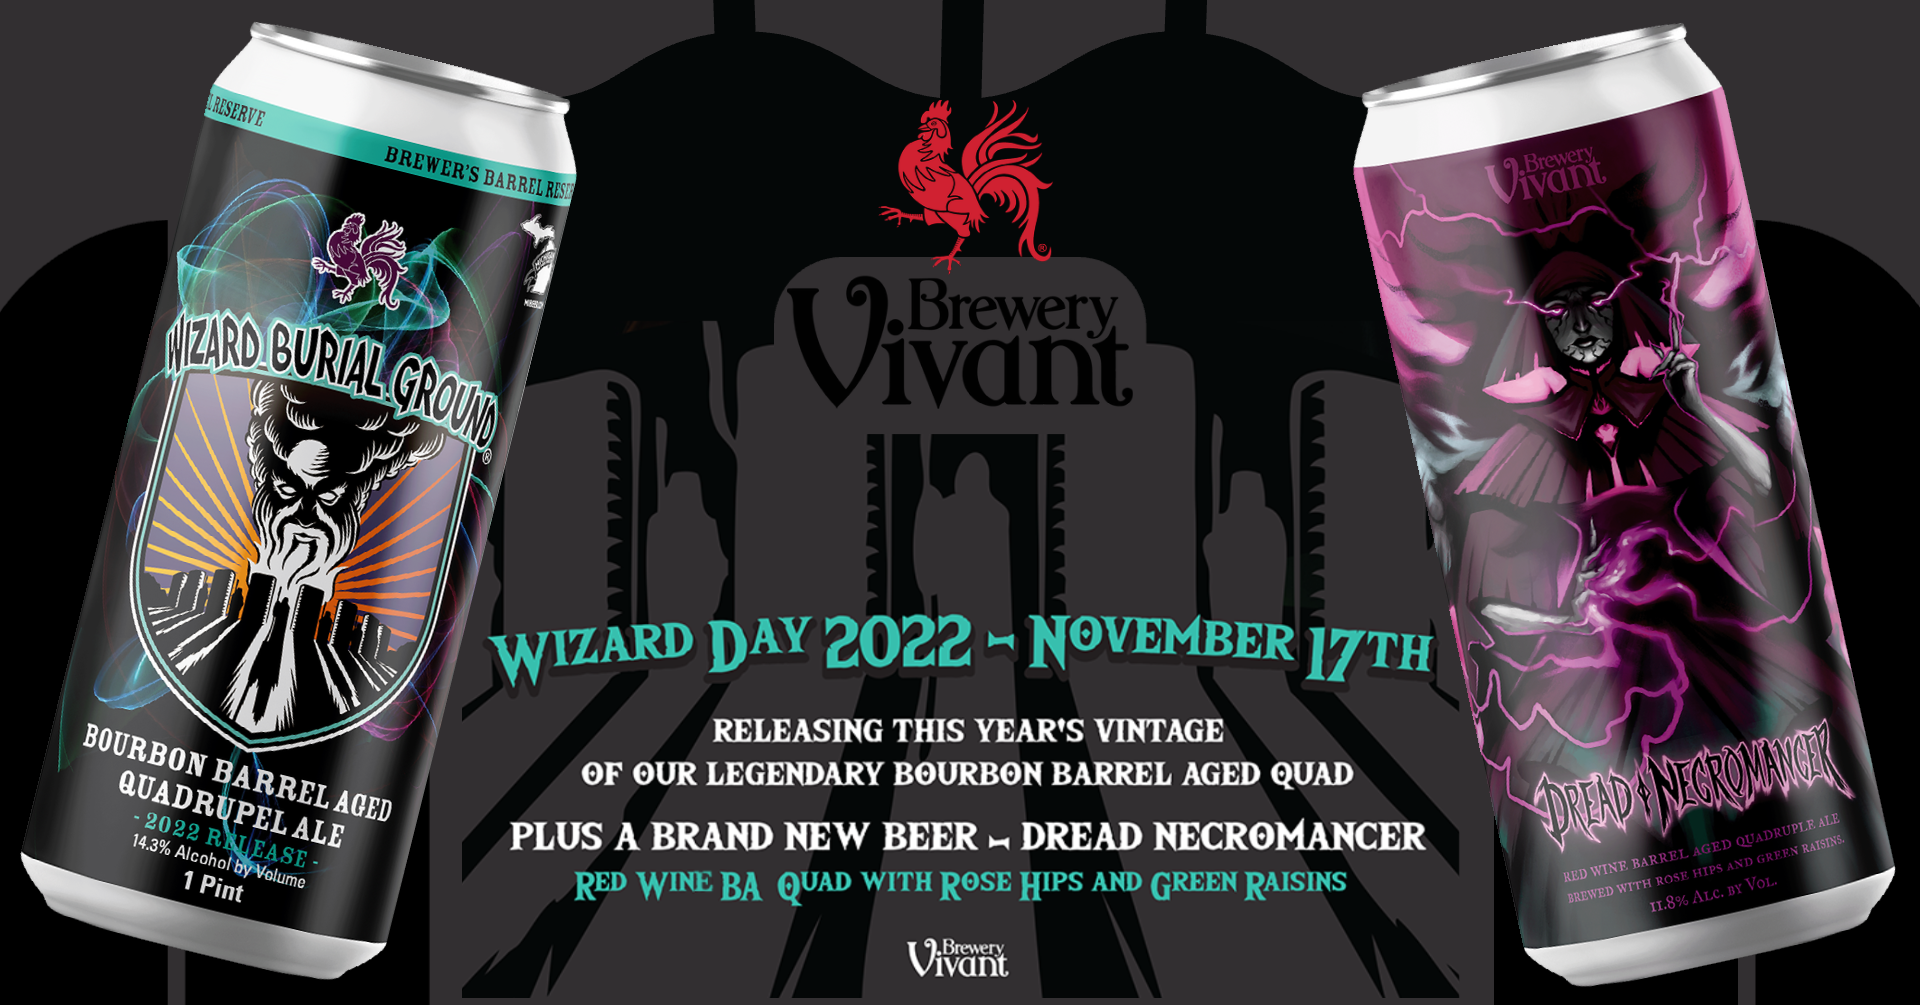 Wizard Day event